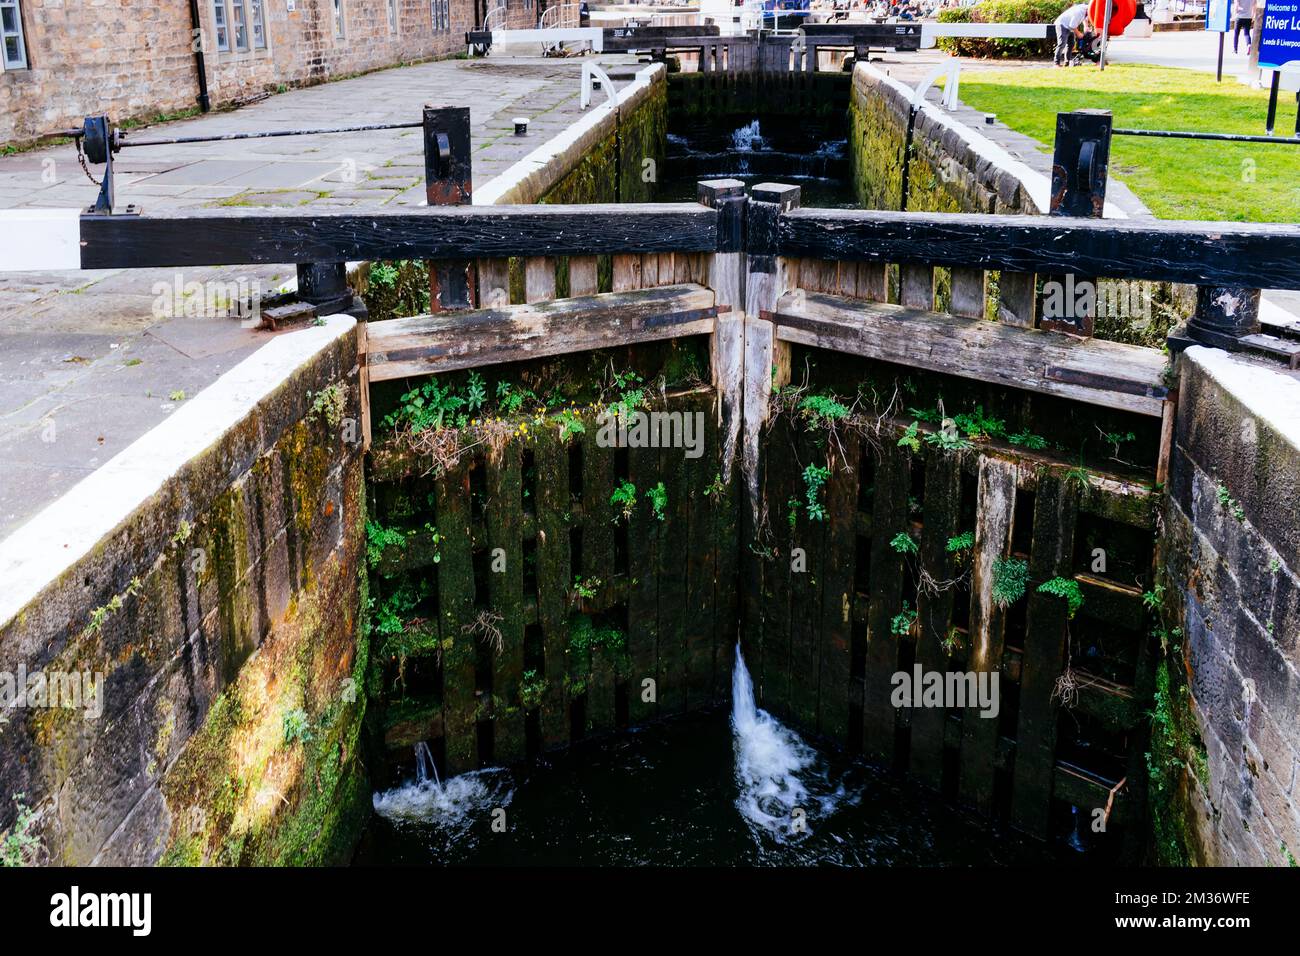 Granary Wharf Lock on the Leeds to Liverpool Canal. Leeds, West Yorkshire, Yorkshire and the Humber, England, United Kingdom, Europe Stock Photo